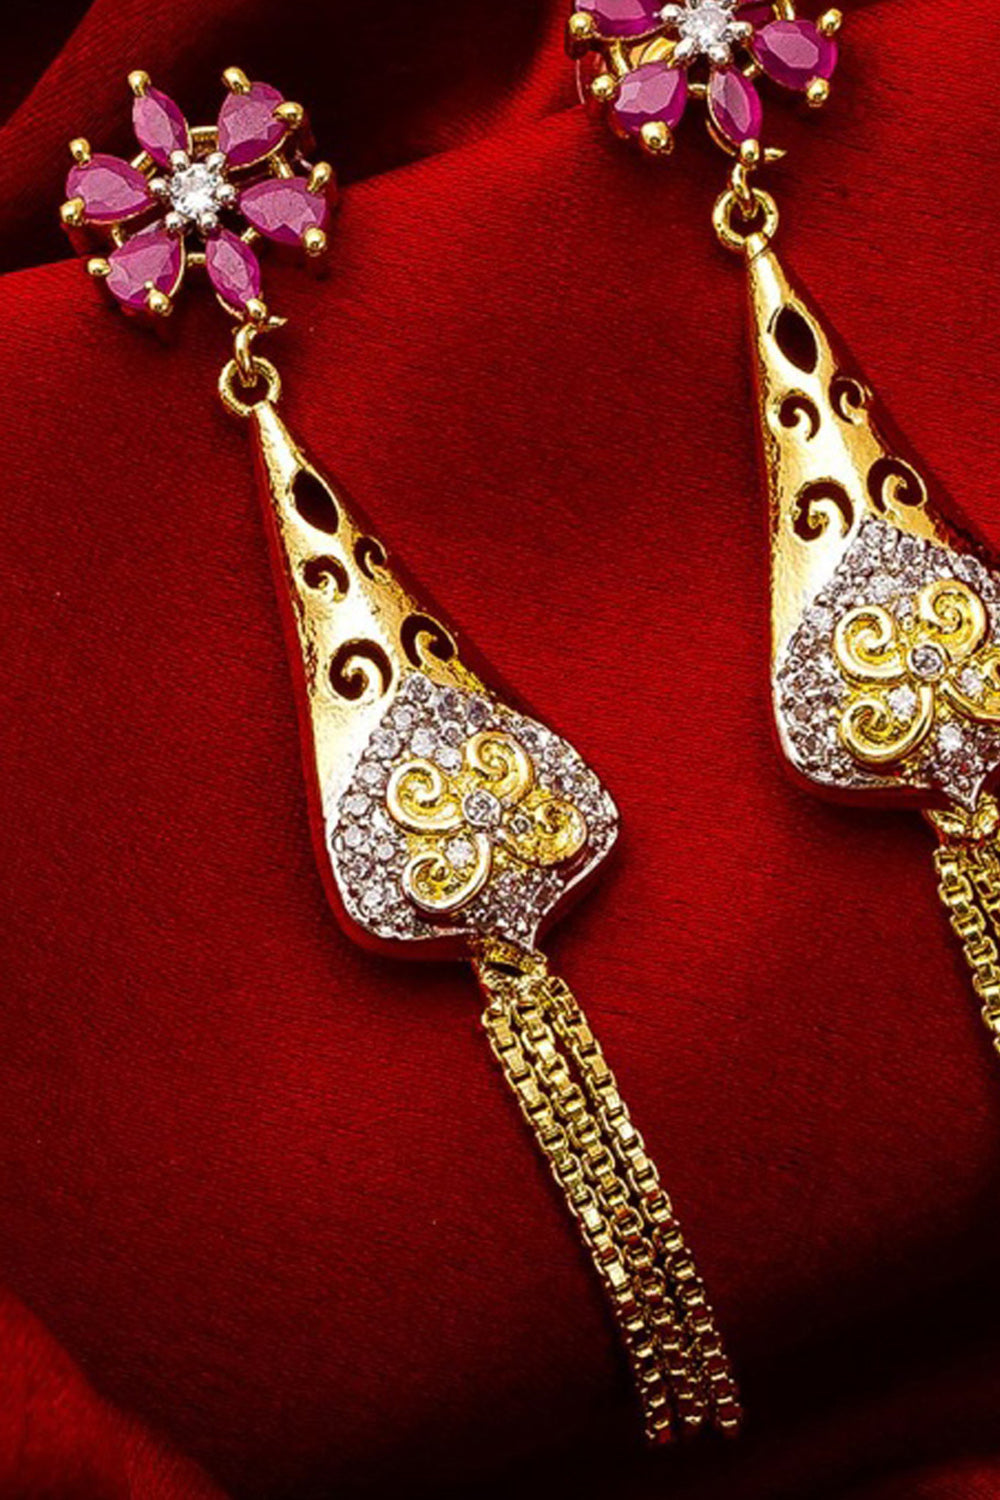 Shop Alloy Drop Earrings For Women's in White and Pink At KarmaPlace